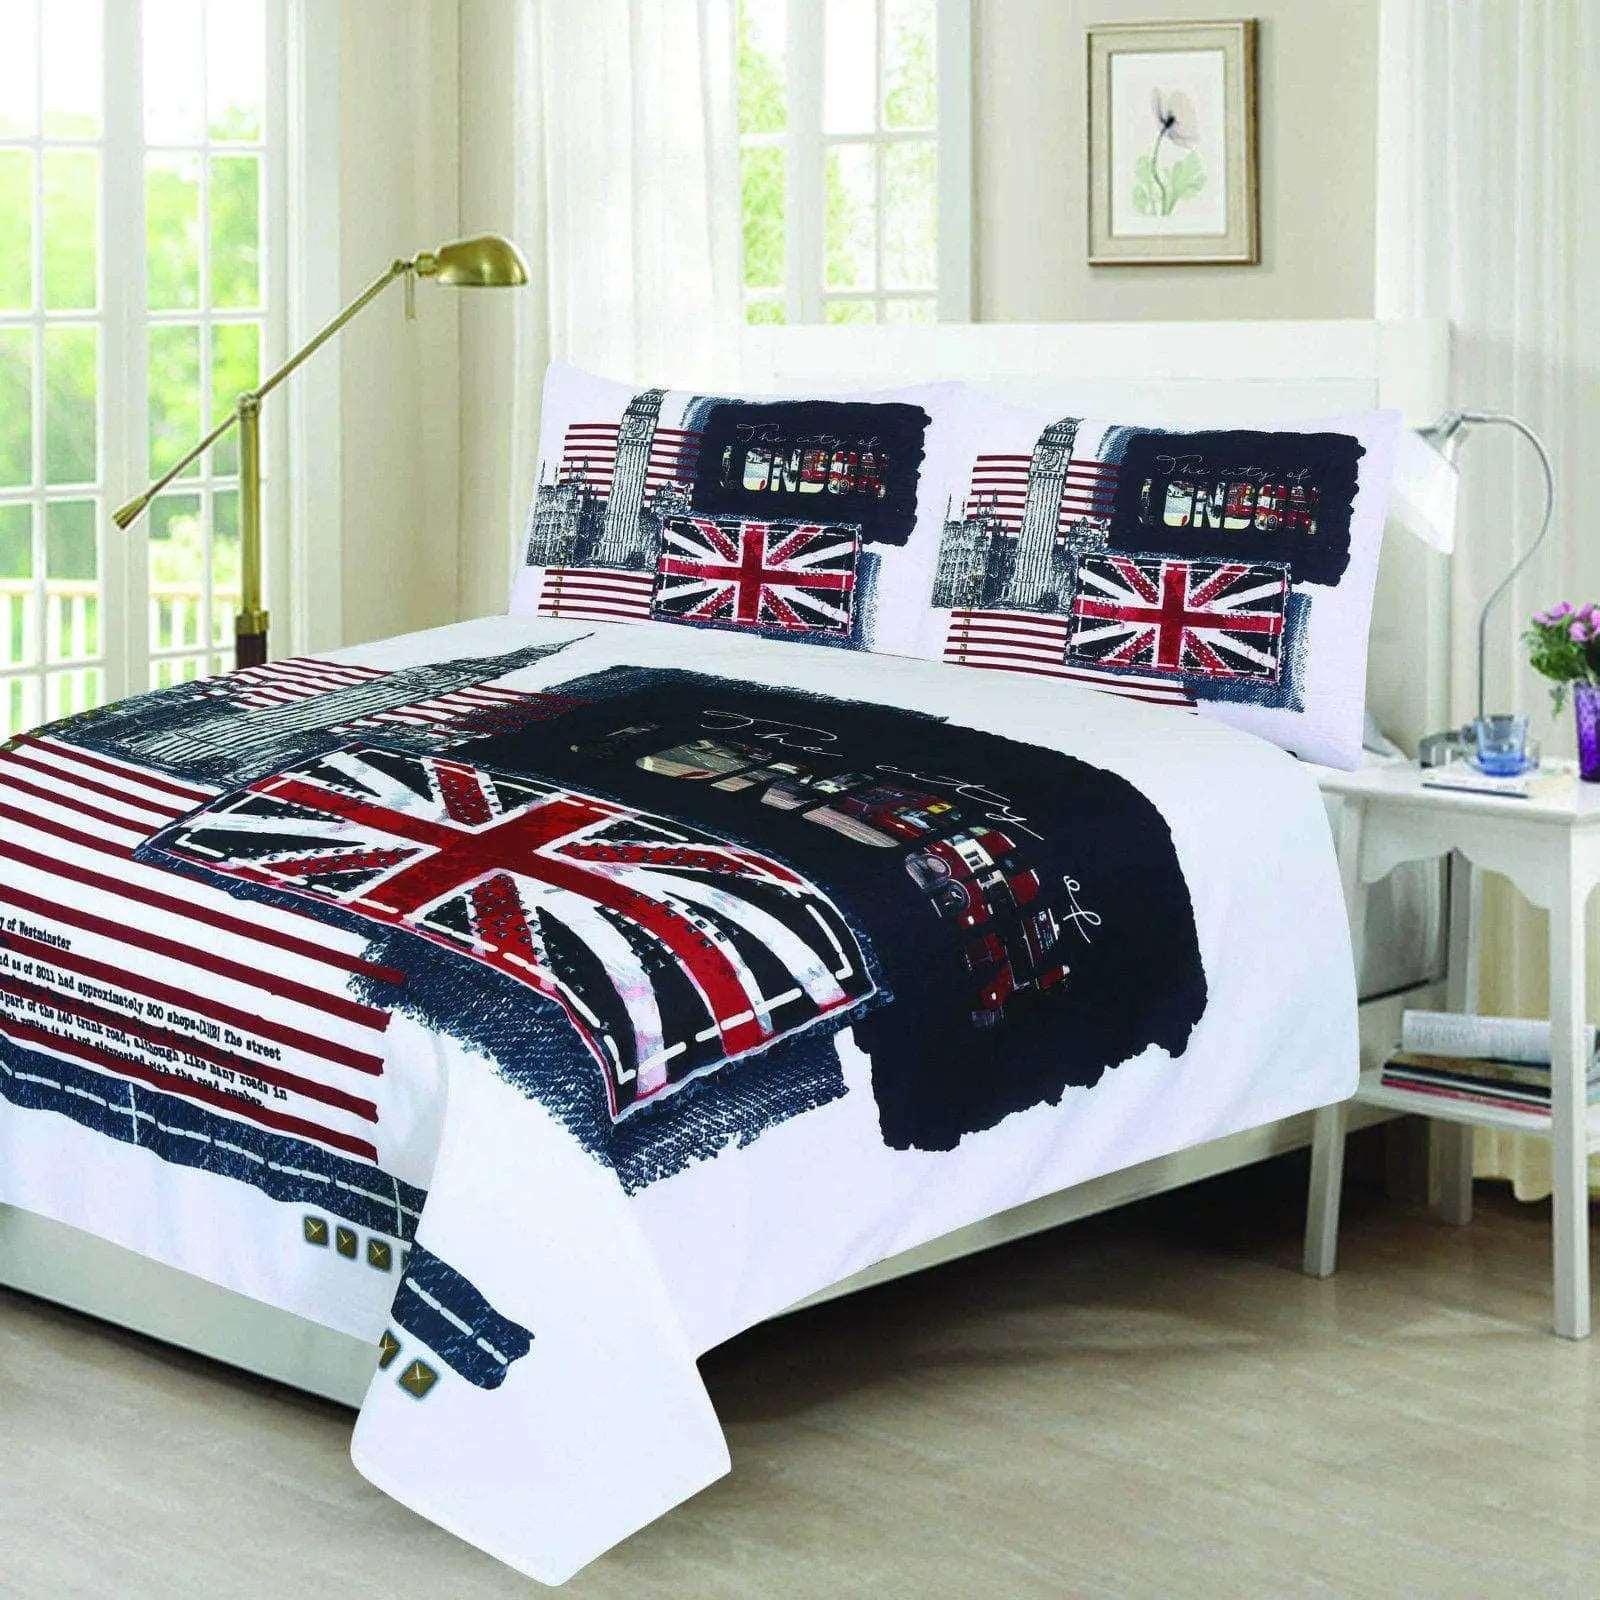 New Design Hotel Quality Printed Bedding Set Duvet Quilt Cover with Pillowcases. - Arlinens